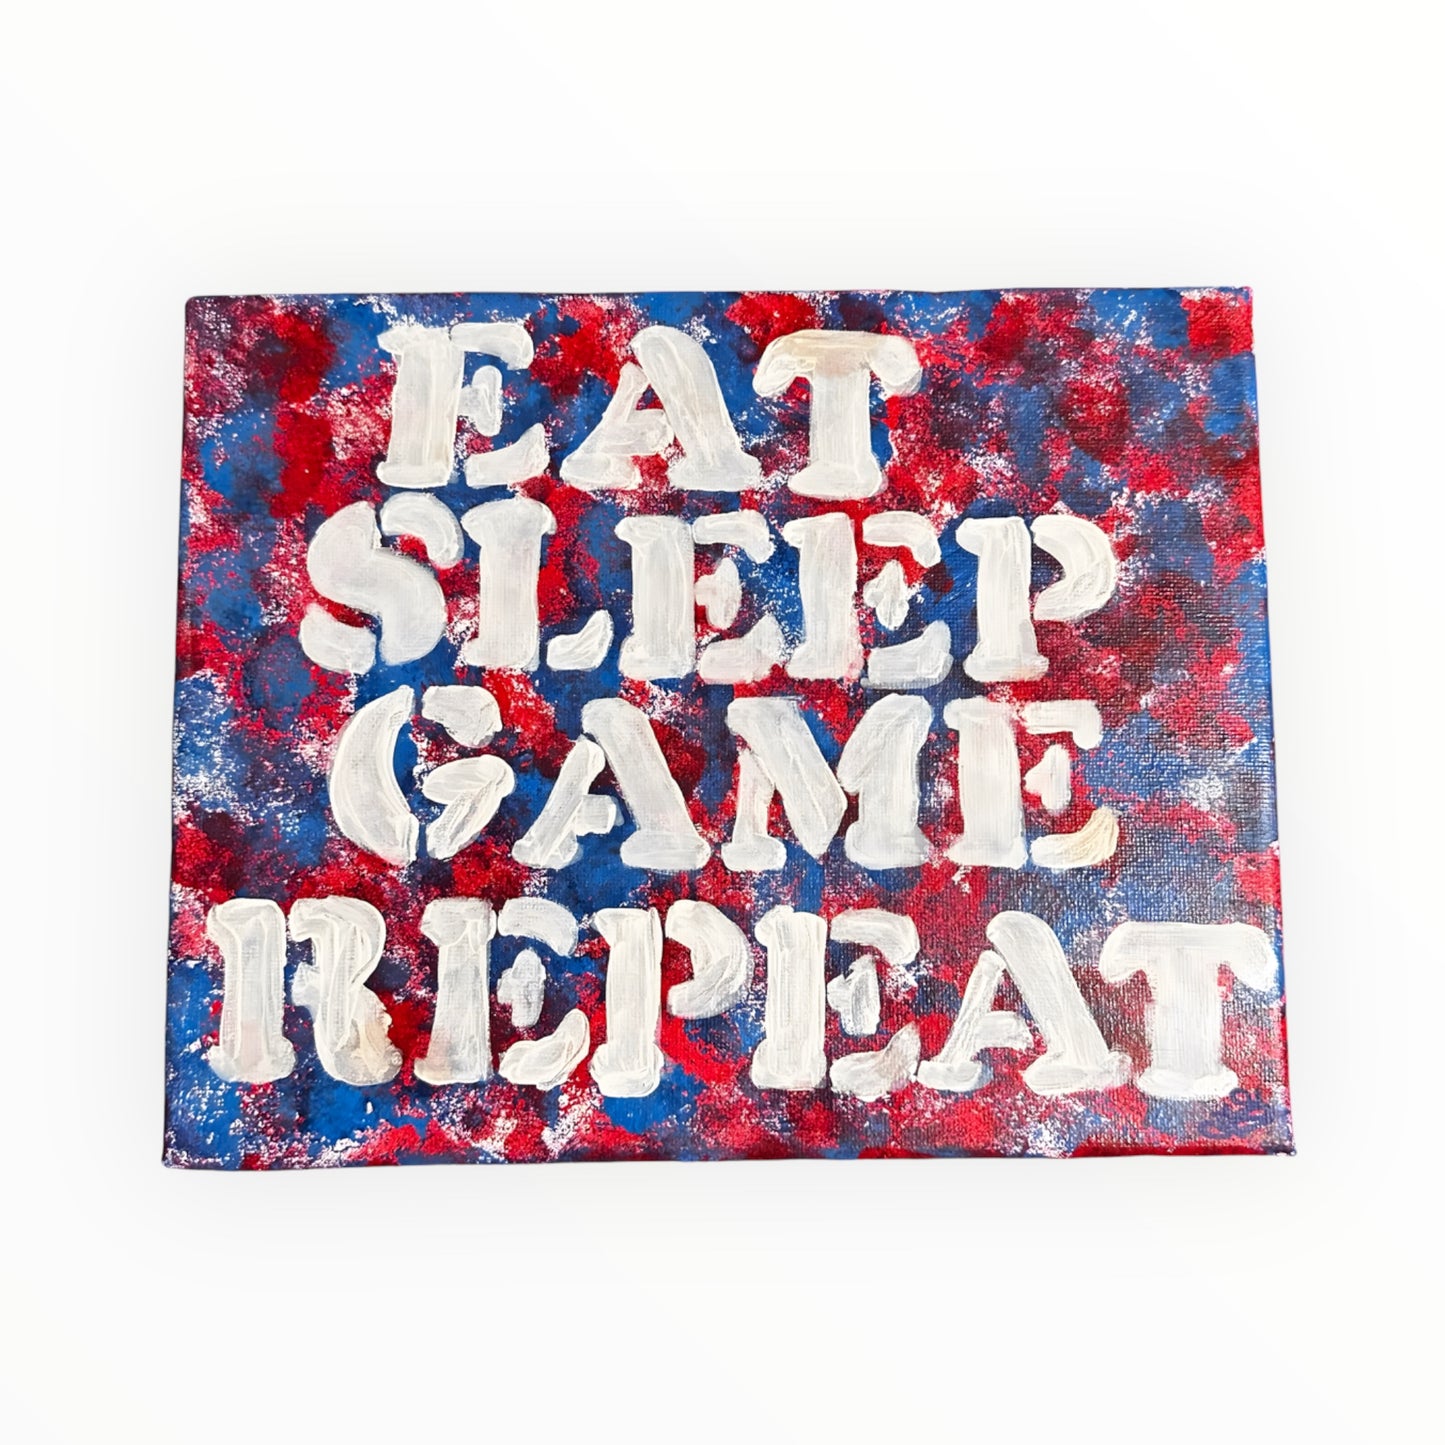 JenDore Handmade Hand-painted " Eat Sleep Game Repeat " 8x10 Blue Red Canvas Wall Art Gaming Video
Game Sign Decor